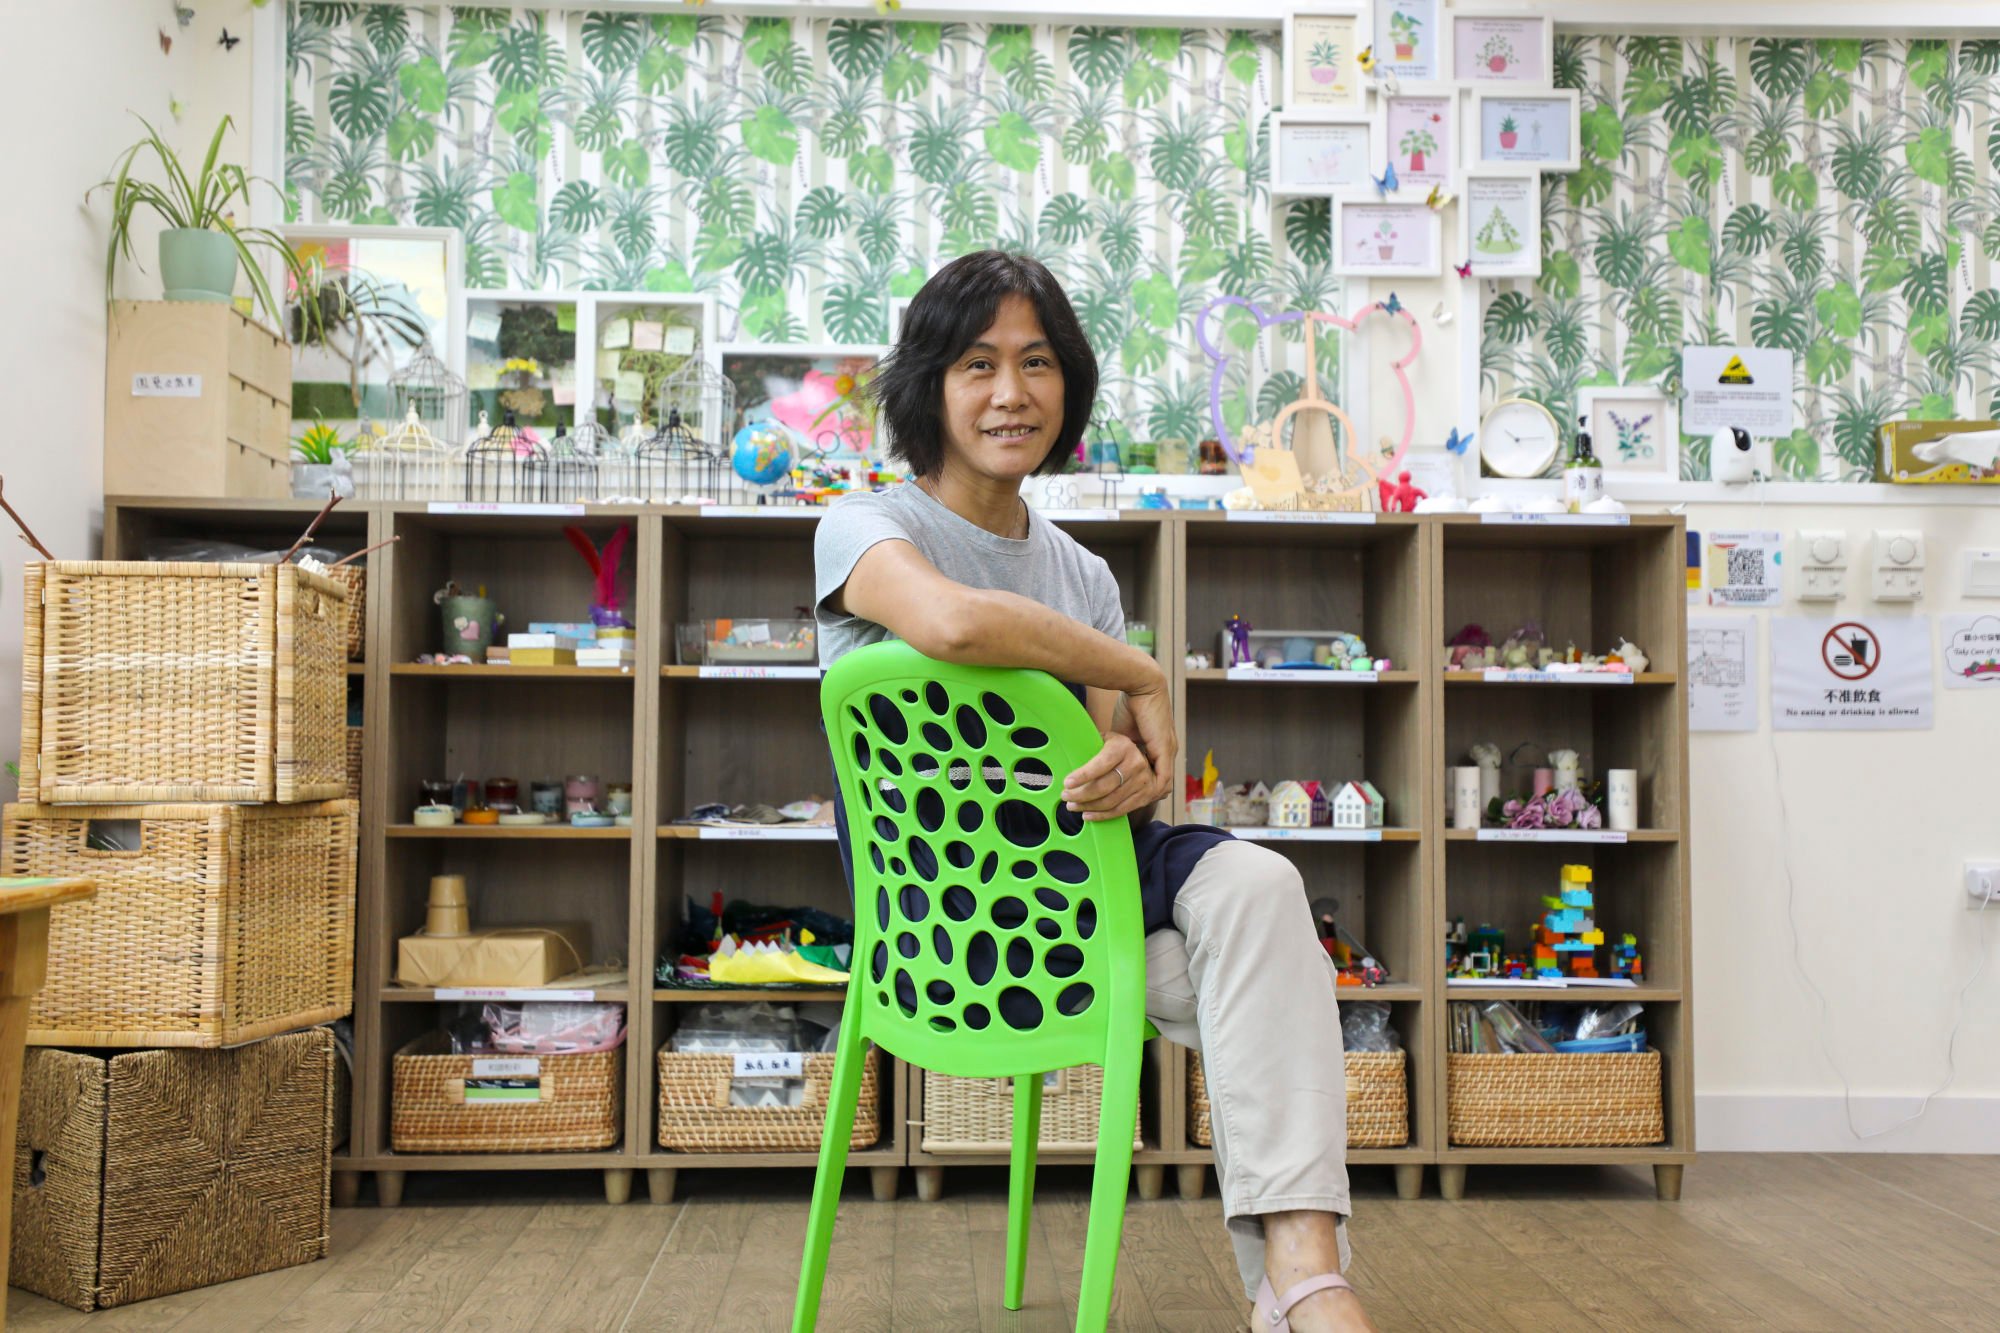 Doris Yu, a CMAC social worker for co-parenting support, says many divorced people struggle to juggle the needs of their old and new families. Photo: Xiaomei Chen